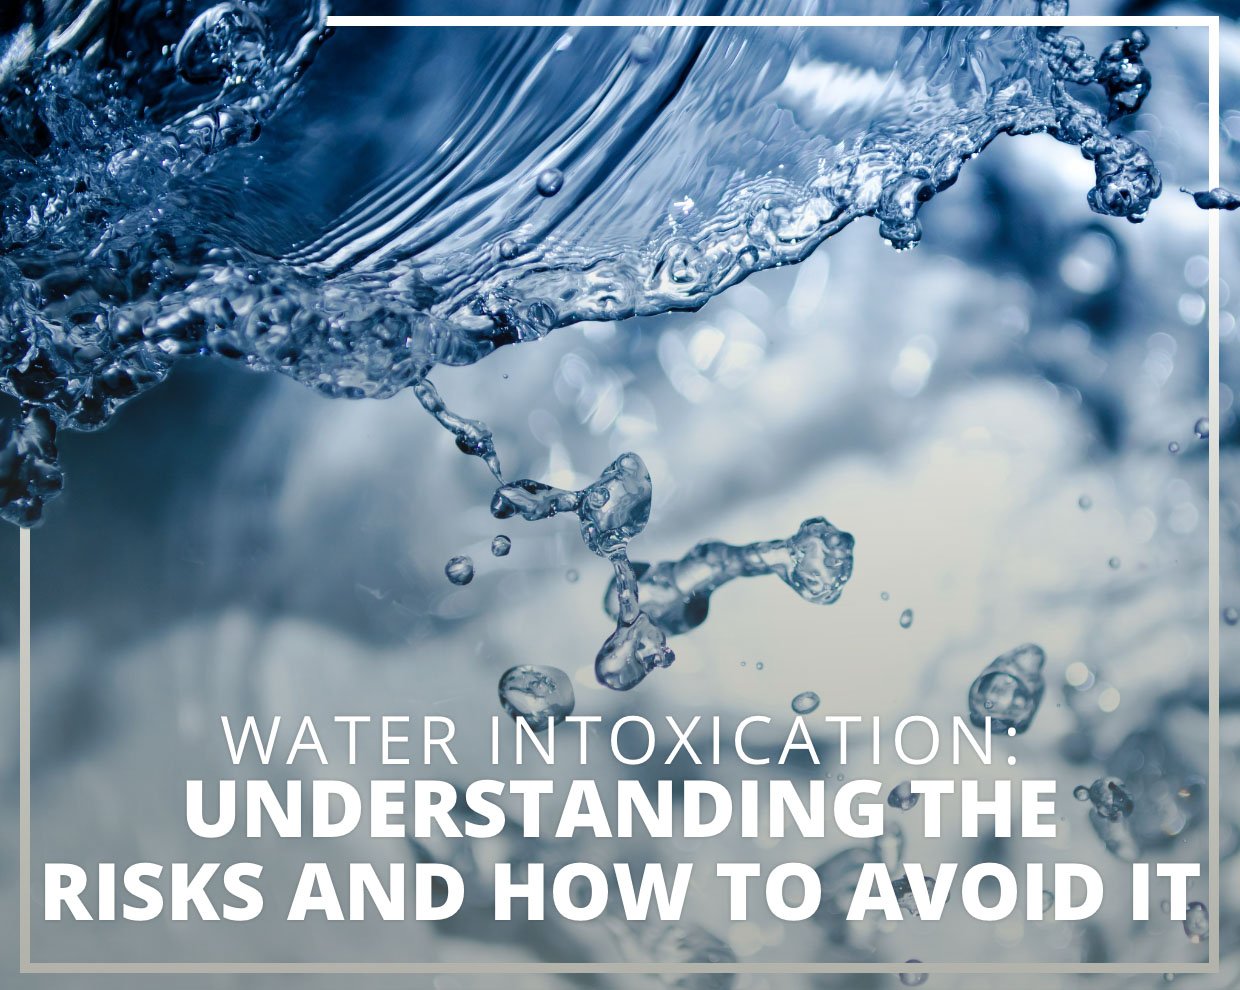 Water Intoxication: Understanding the Risks and How to Avoid It